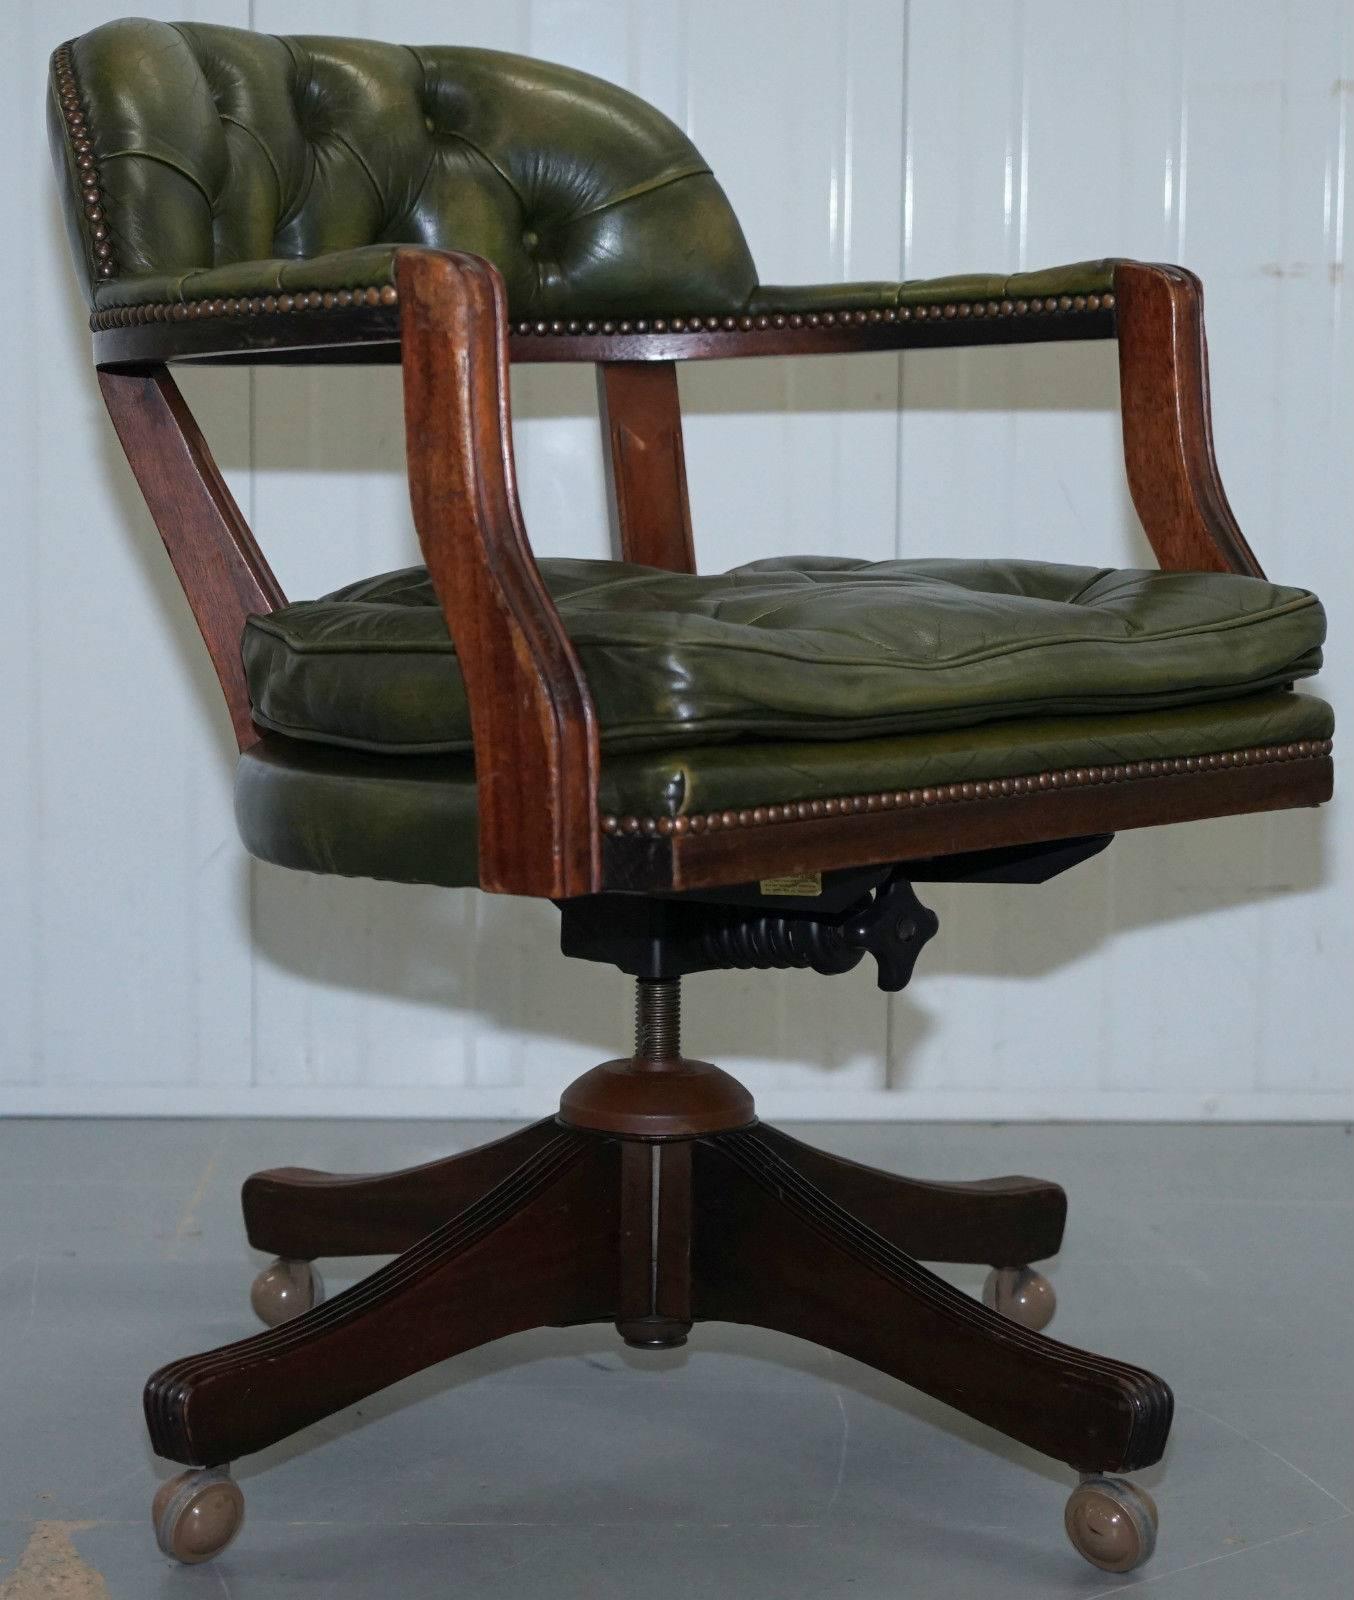 We are delighted to offer for sale this lovely aged green leather Chesterfield Admirals court captain’s chair

These chairs are called court chairs because they little the British court system during the 1960s-1980s

This chair is in lightly